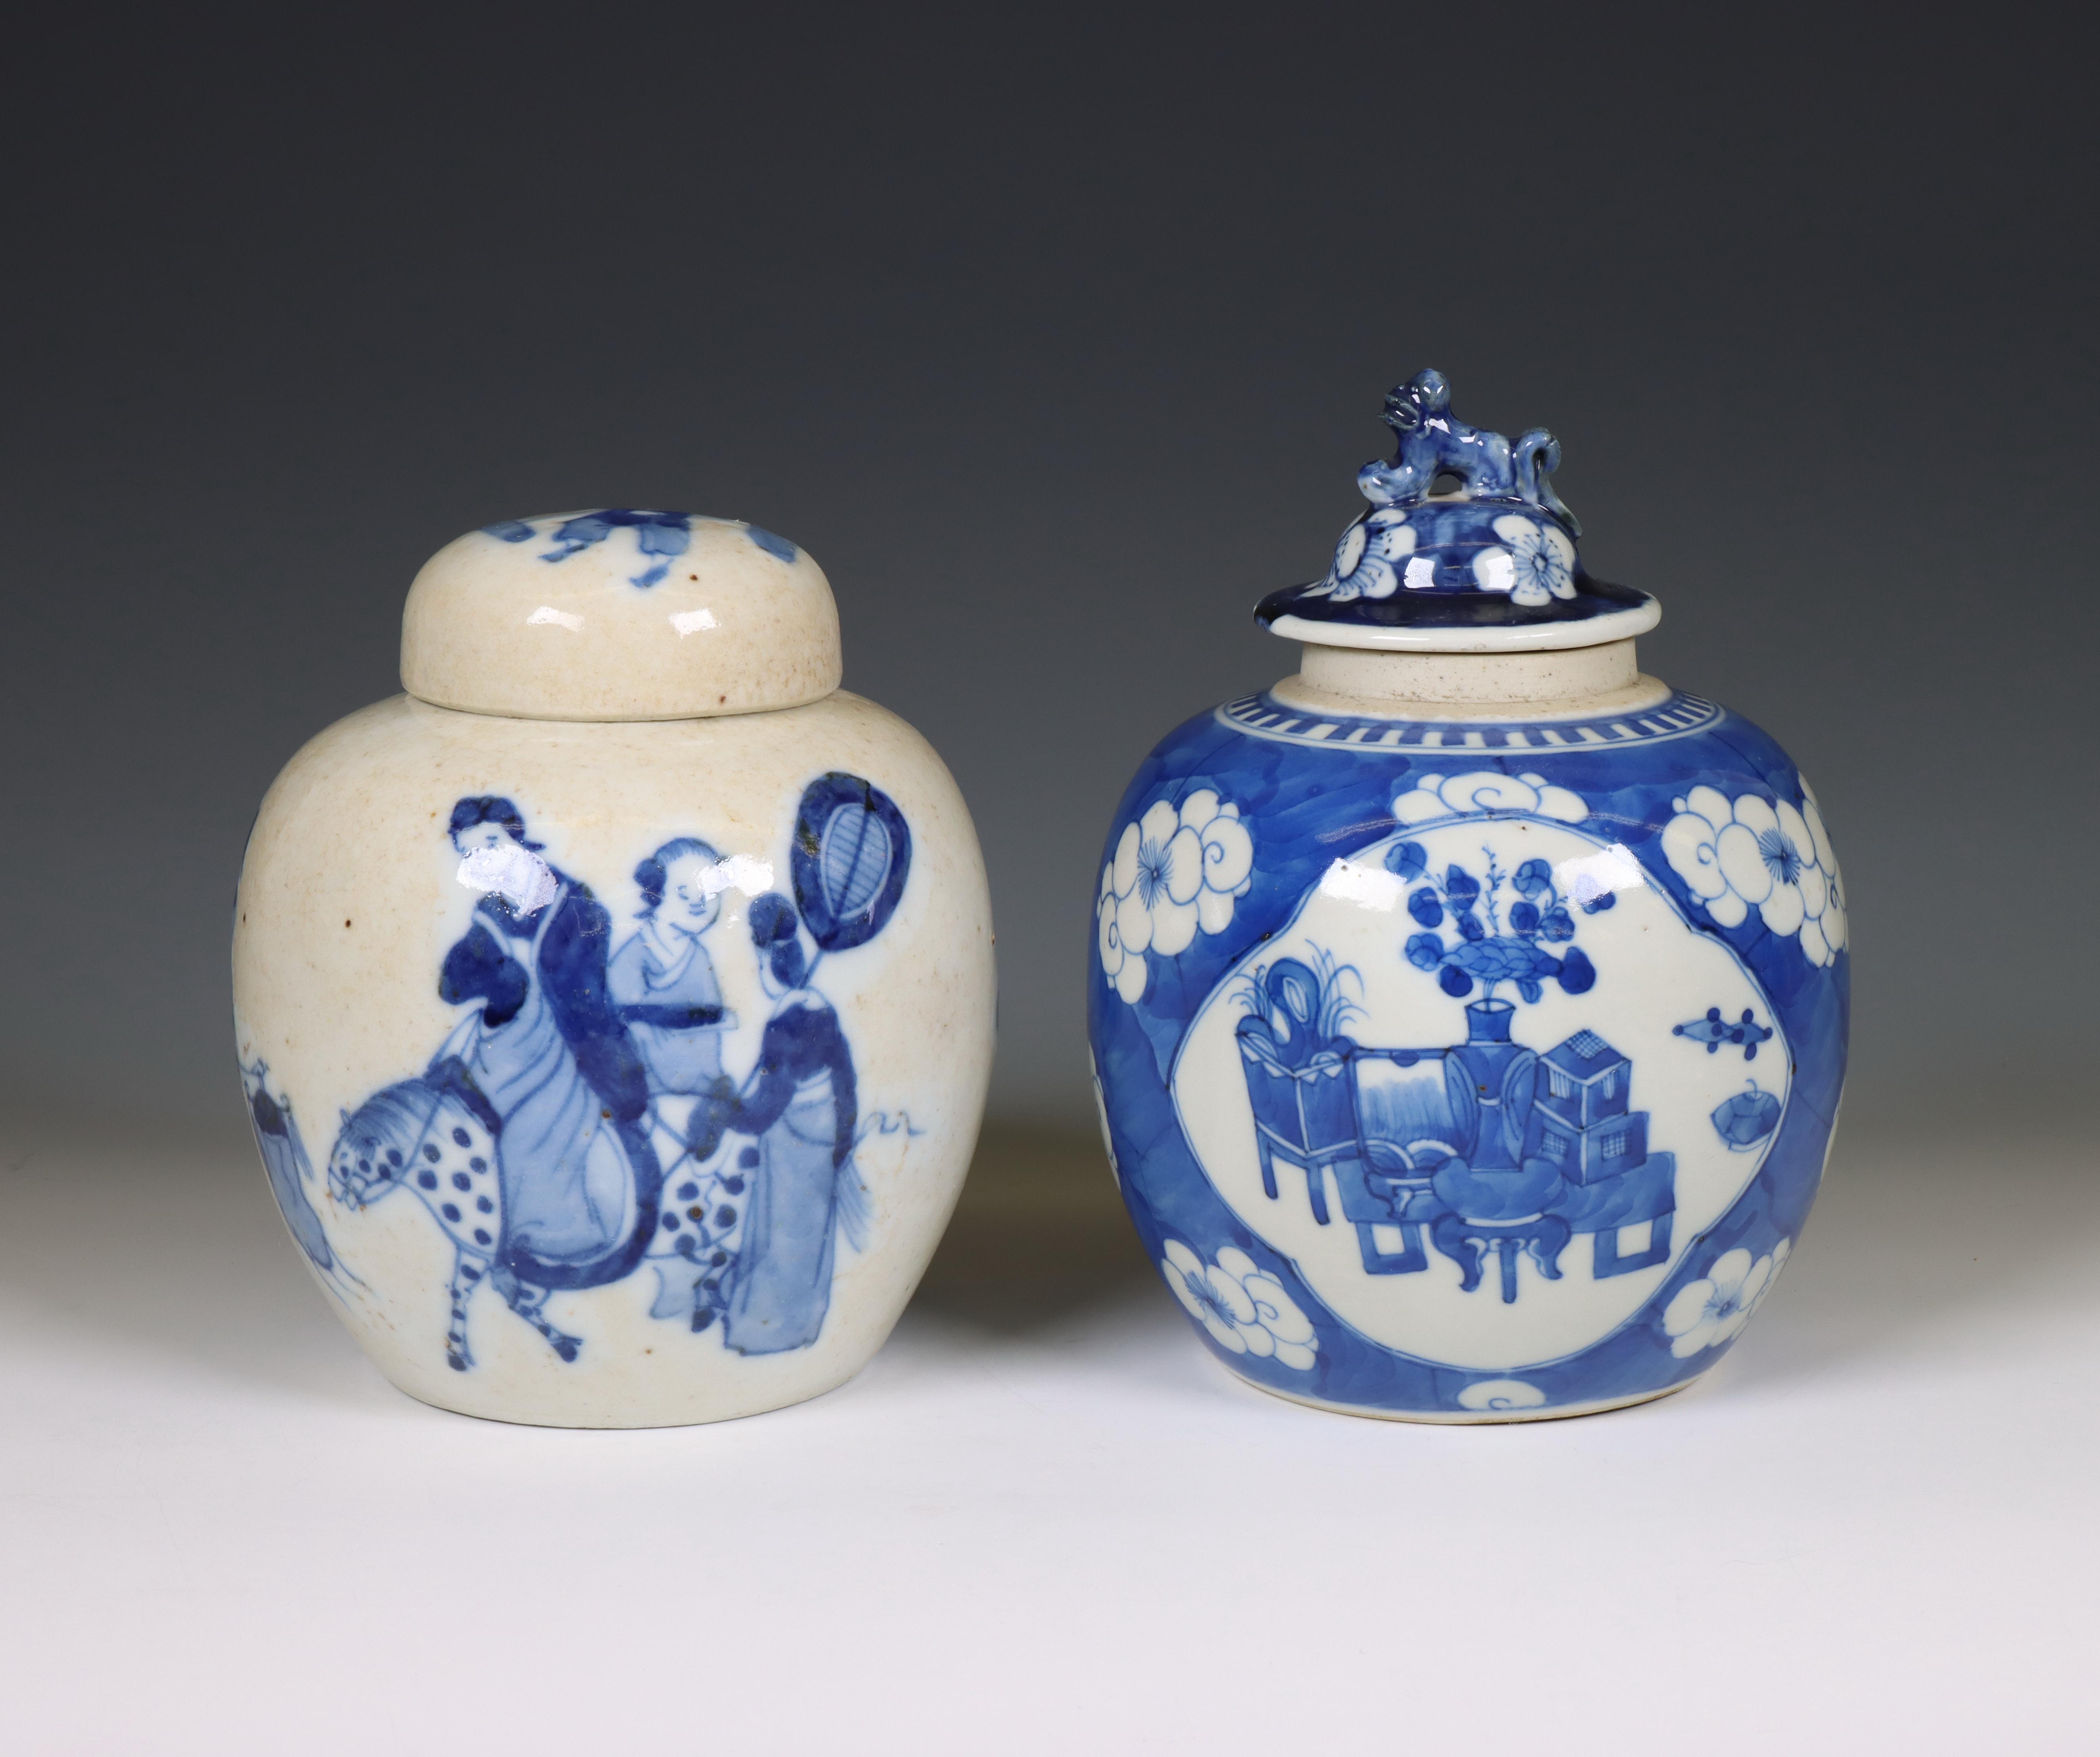 China, two blue and white porcelain ginger jars and covers, 19th-20th century,